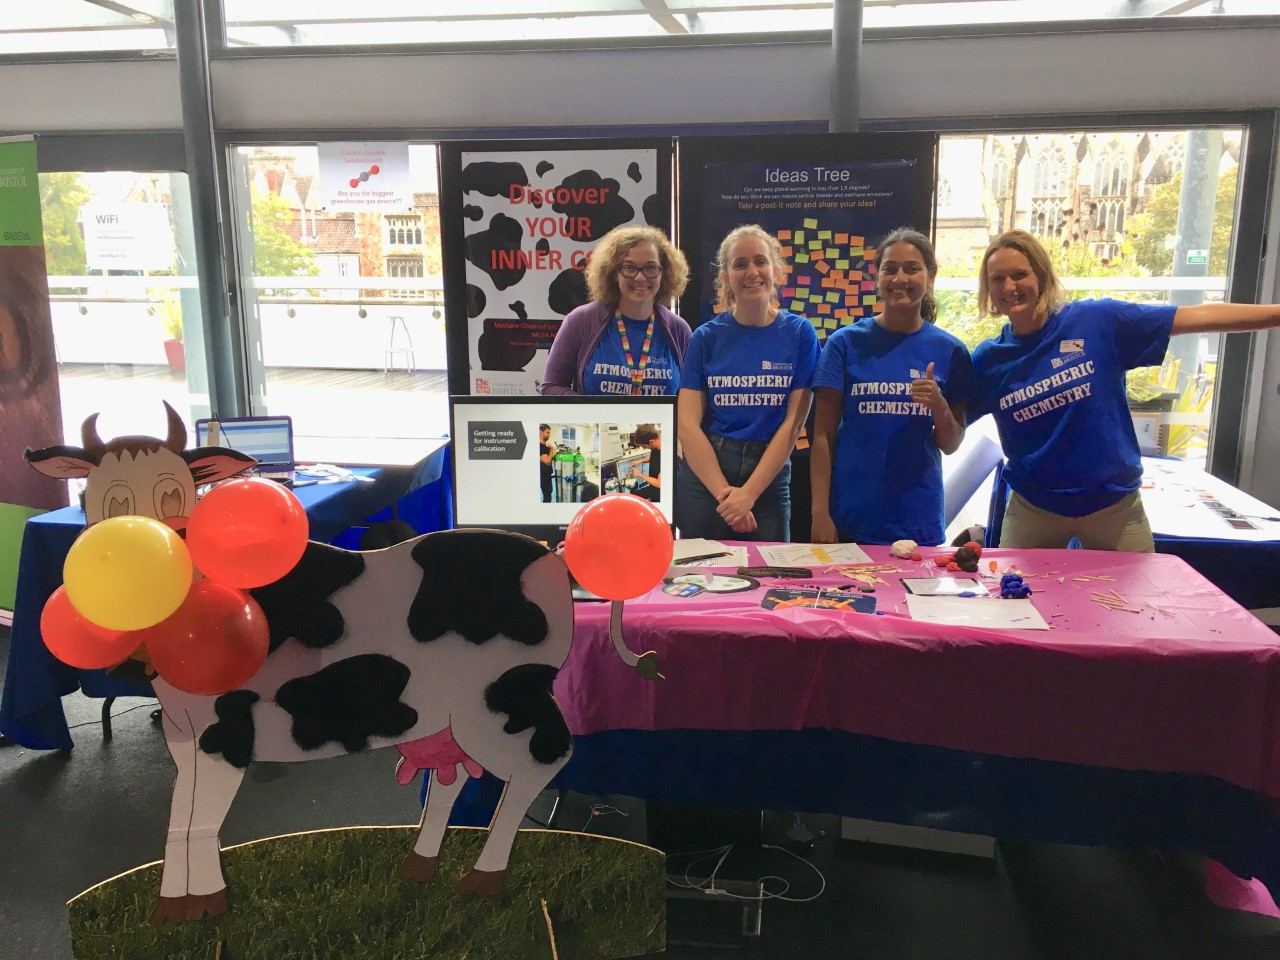 Alecia Nickless, Charlotte Gregson, Jenna Ram and Aoife Grant after engaging 300 school students about greenhouse gas sources and their impact on the earths atmosphere at the FUTURES2019 event in 'We the Curious' science museum, Bristol.